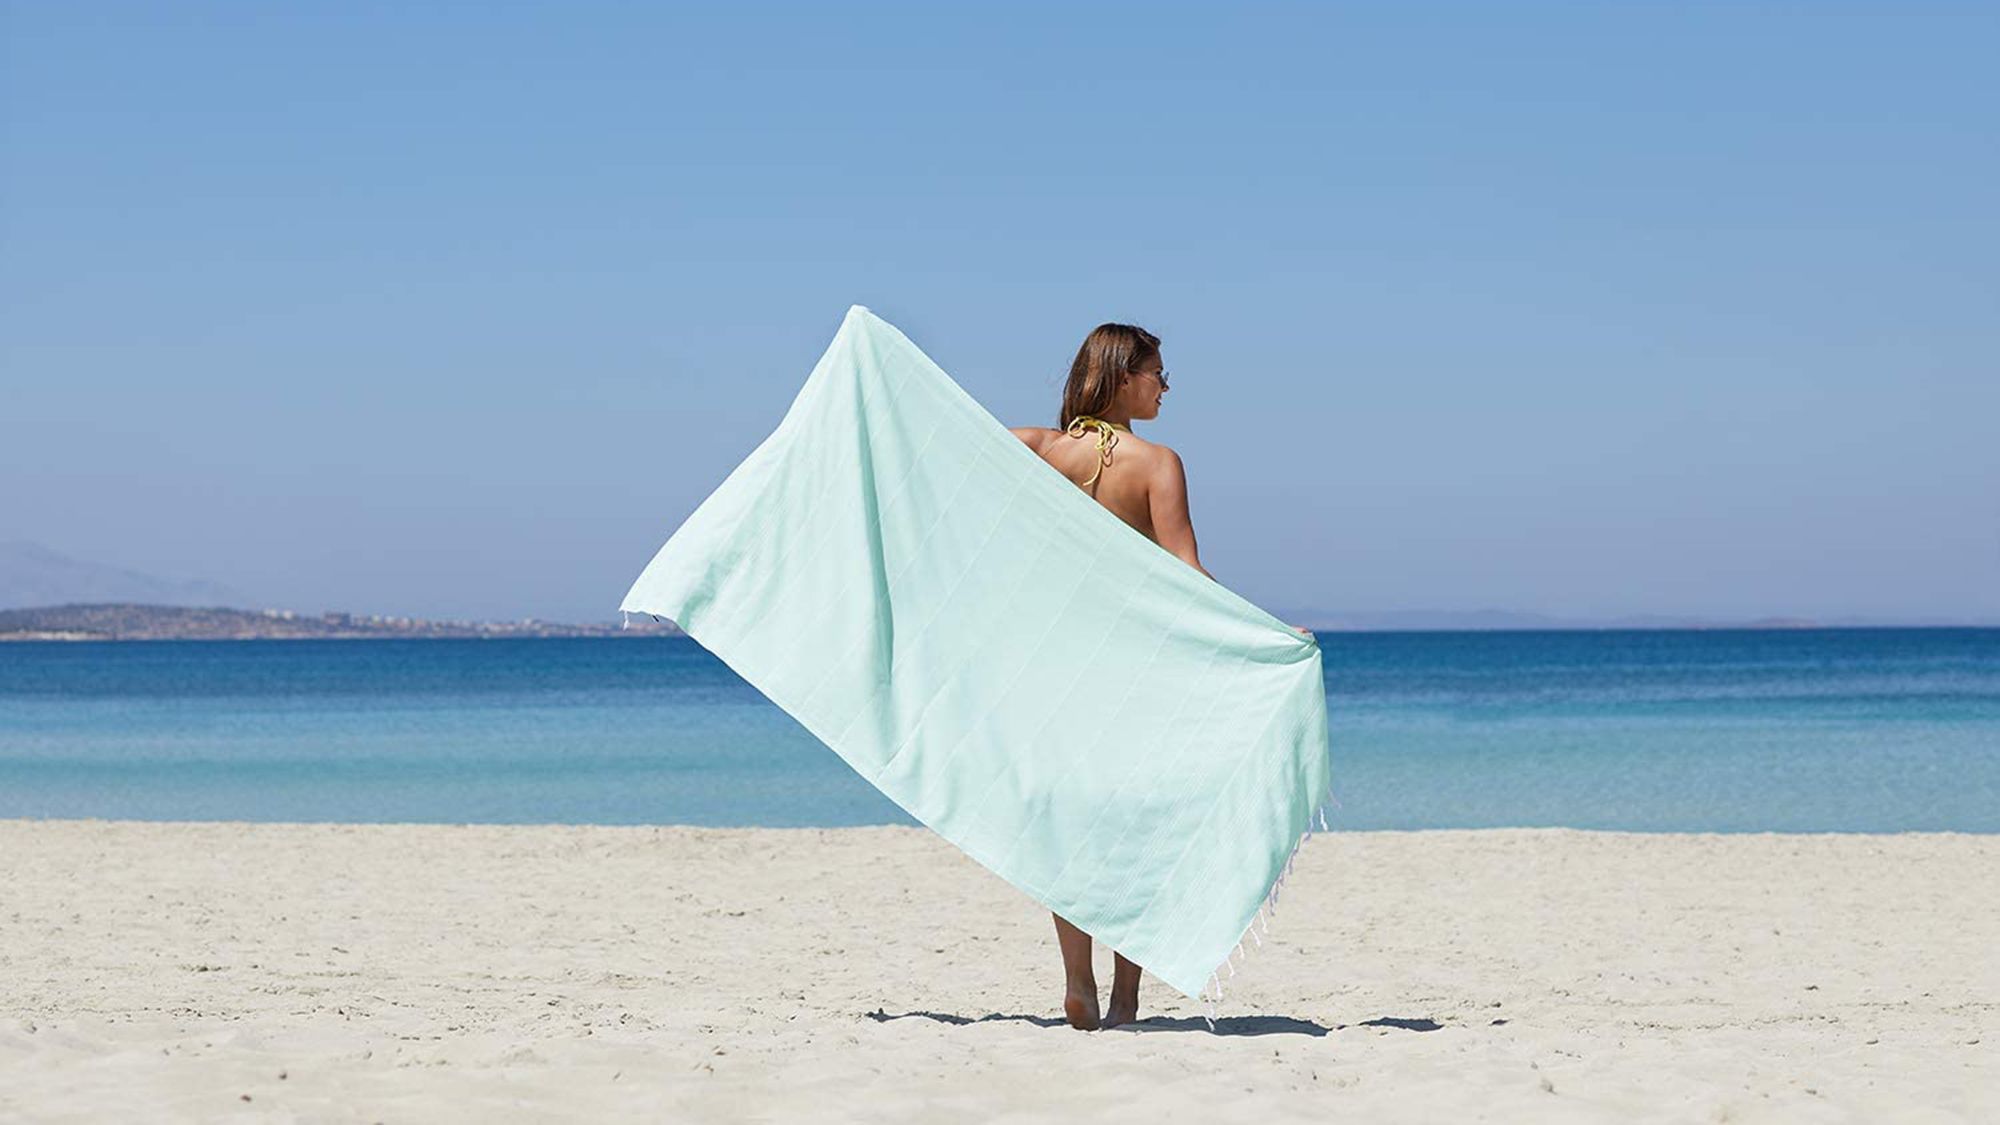 15 Best Large Beach Towels for Summer 2023 - Oversized Beach Towels